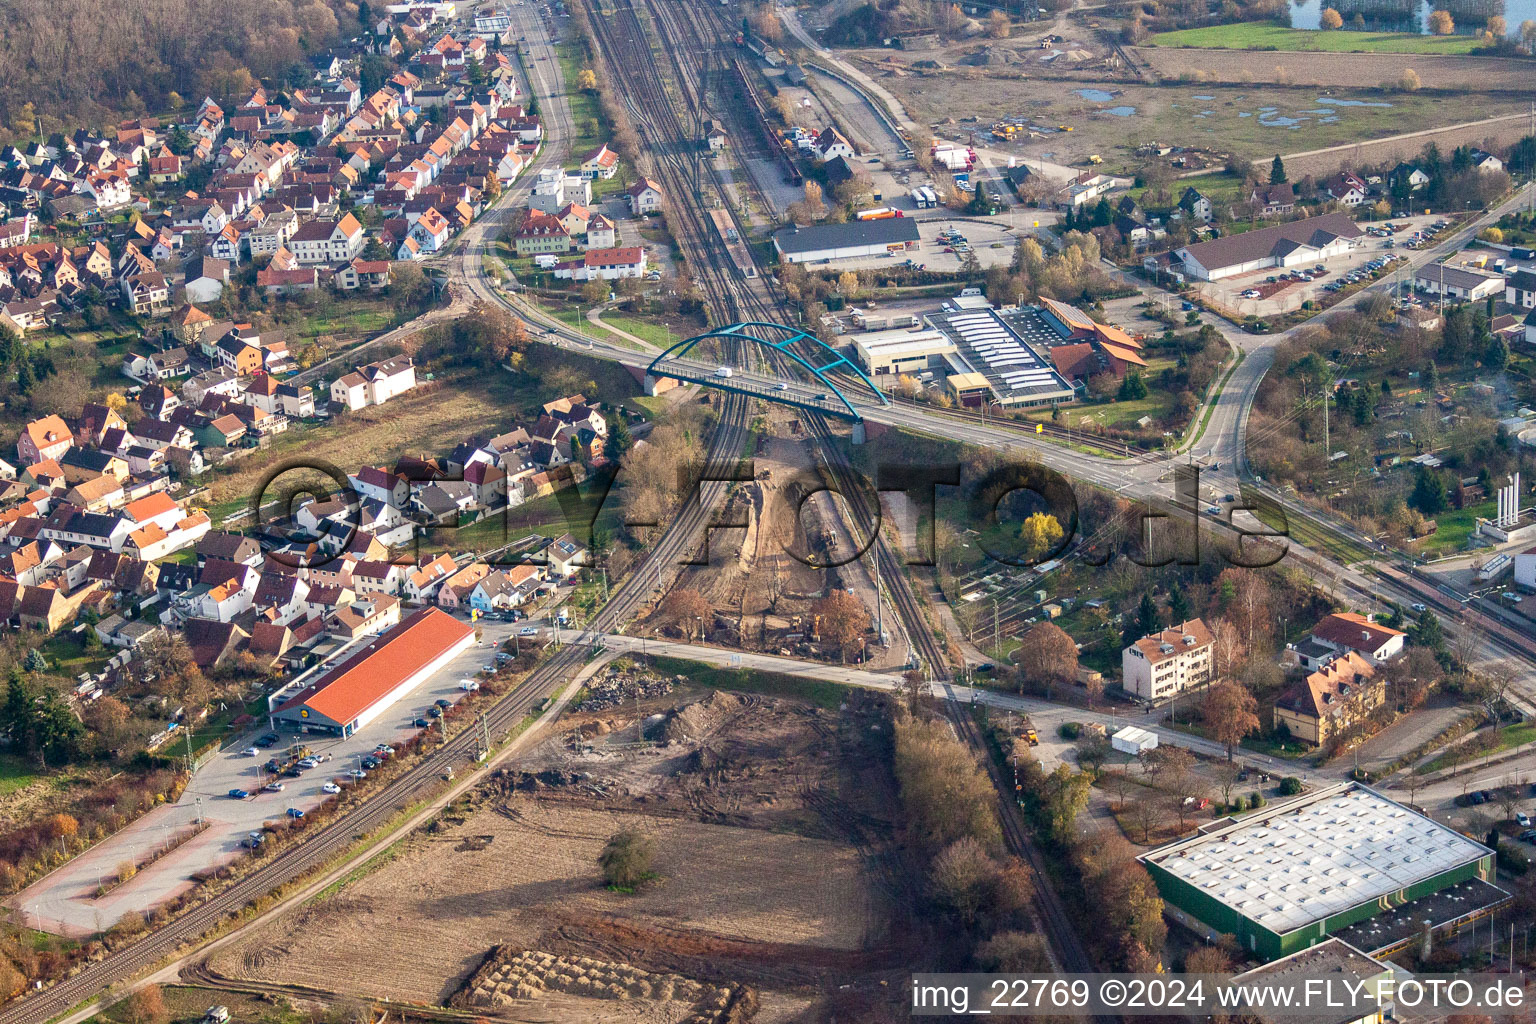 Construction site at the Ottstr railway crossing in Wörth am Rhein in the state Rhineland-Palatinate, Germany